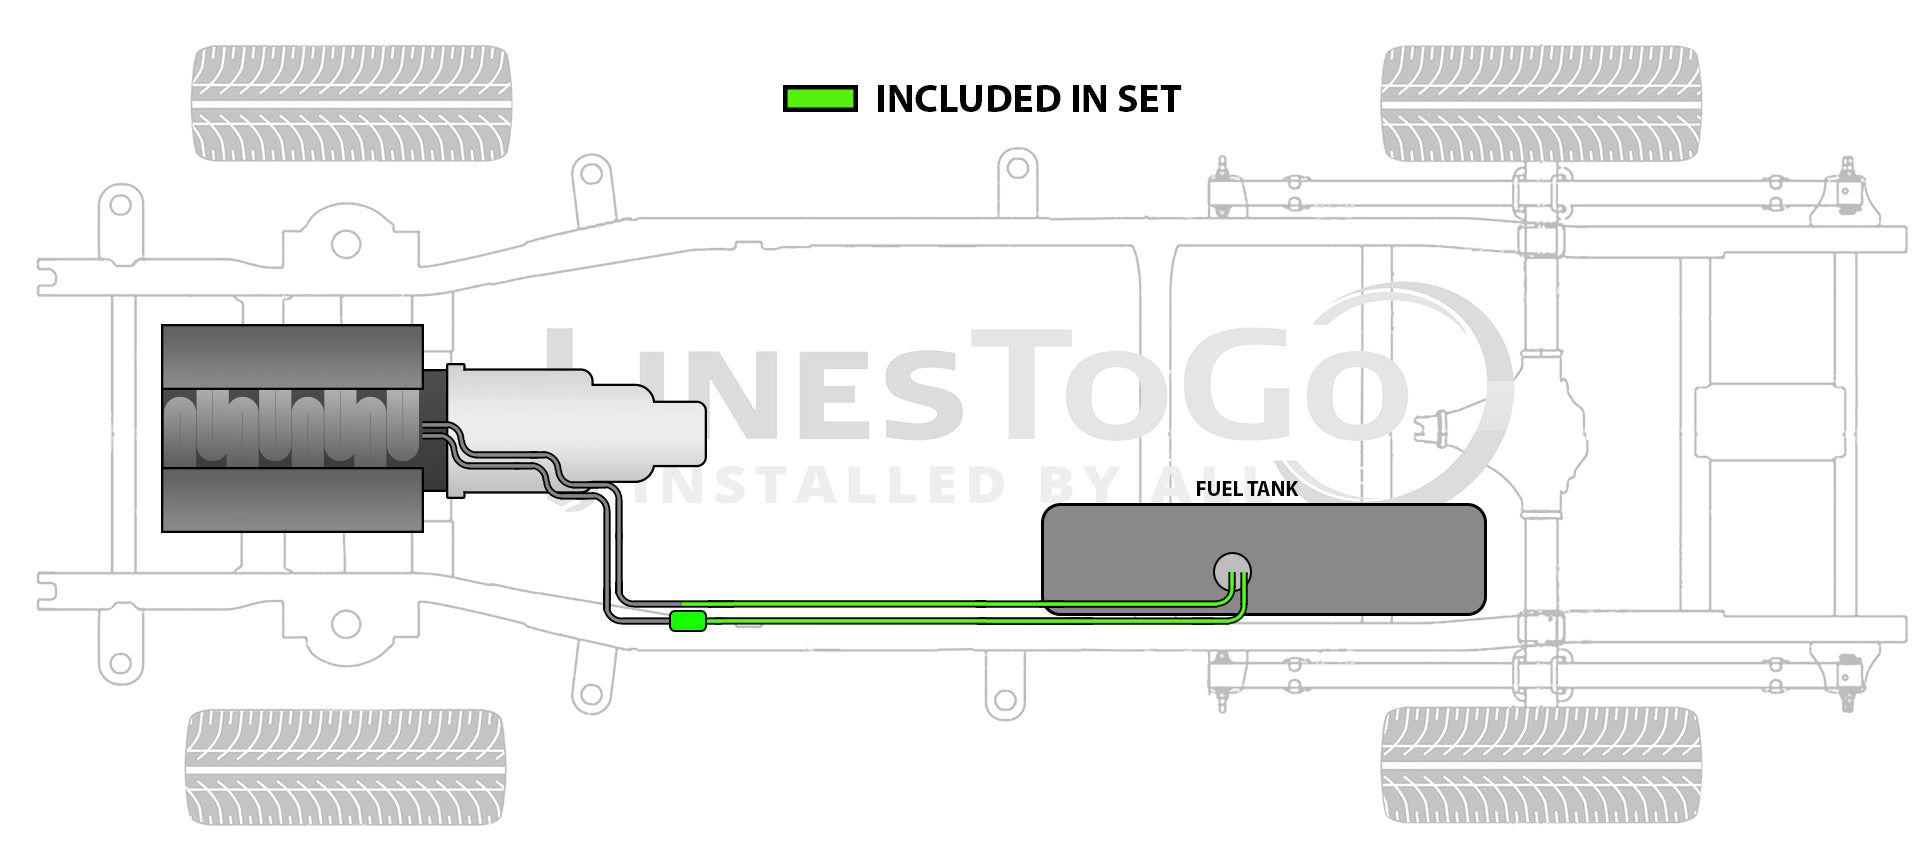 Chevy Truck Rear Fuel Line Set 1994 Reg Cab 8 ft Bed 4WD 7.4L Gas SS400-S1U Stainless Steel